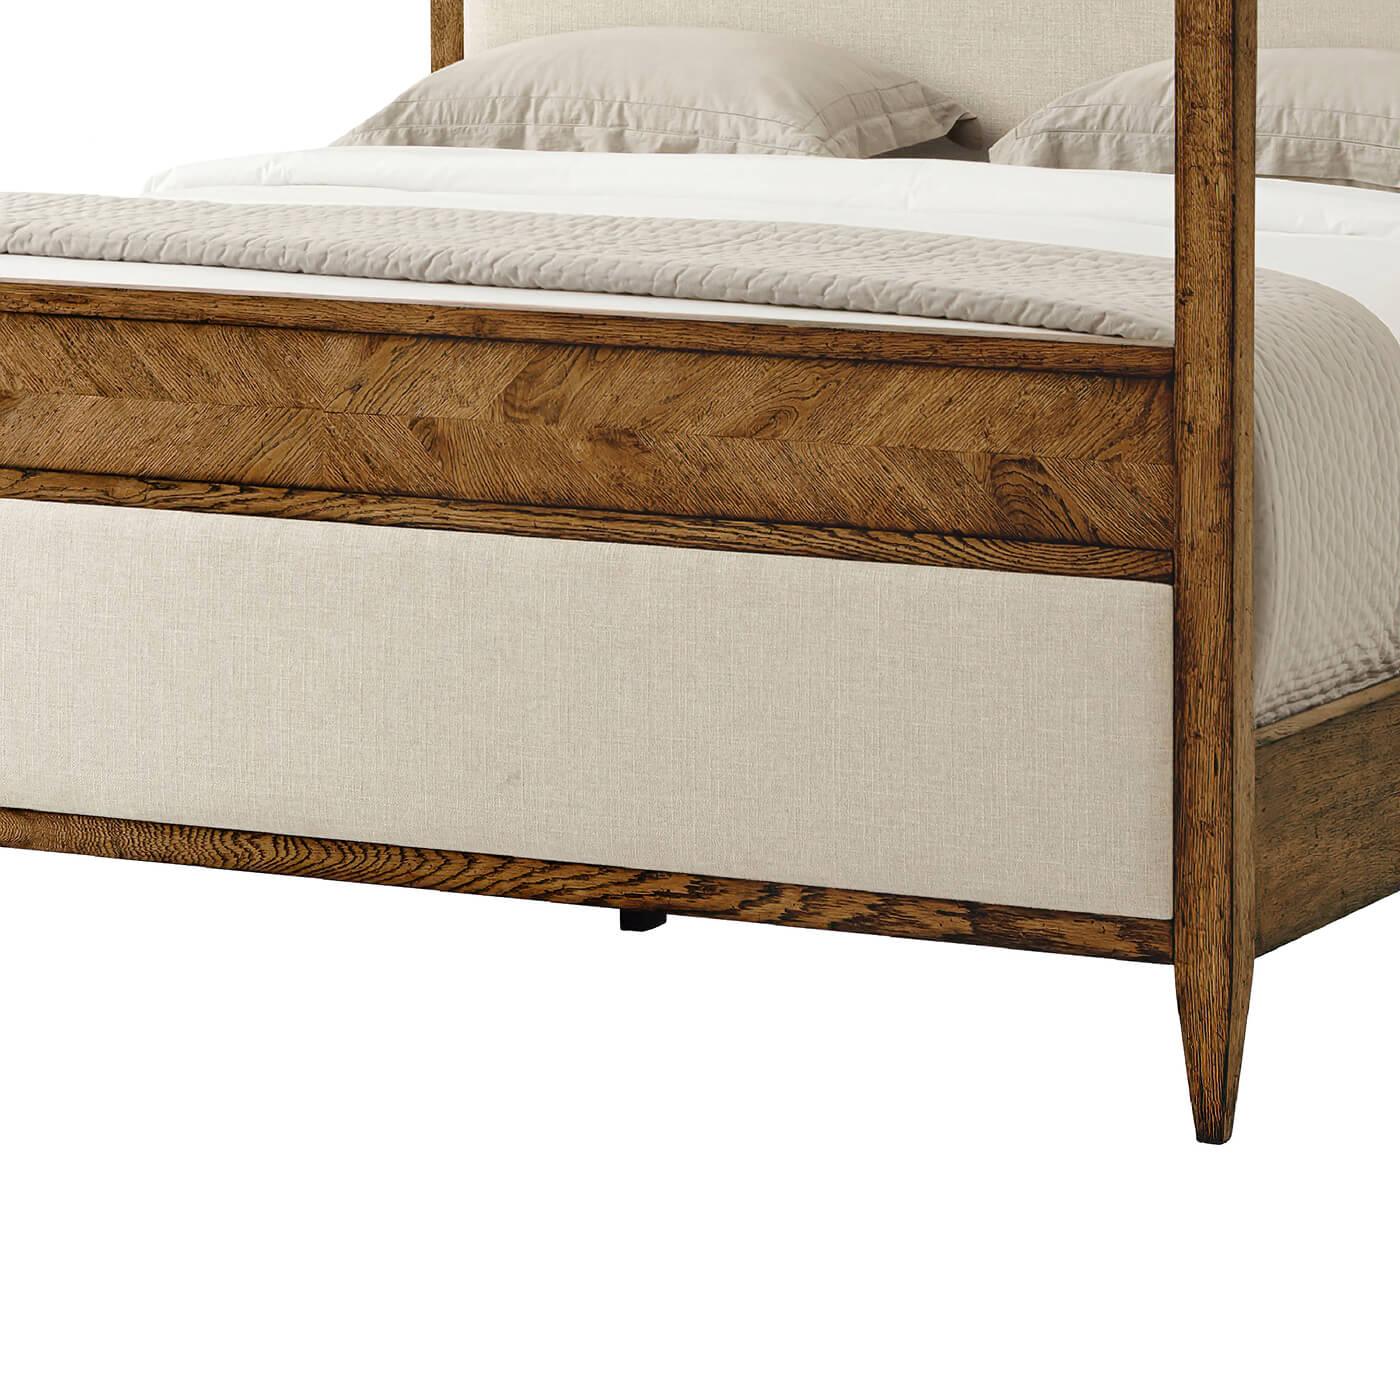 A modern rustic-style canopy king bed crafted from oak with a Dusk finish. This beautifully designed bed has hand-carved oak solids and mirrored herringbone marquetry details blended with an upholstered panel on the headboard and footboard. It rests